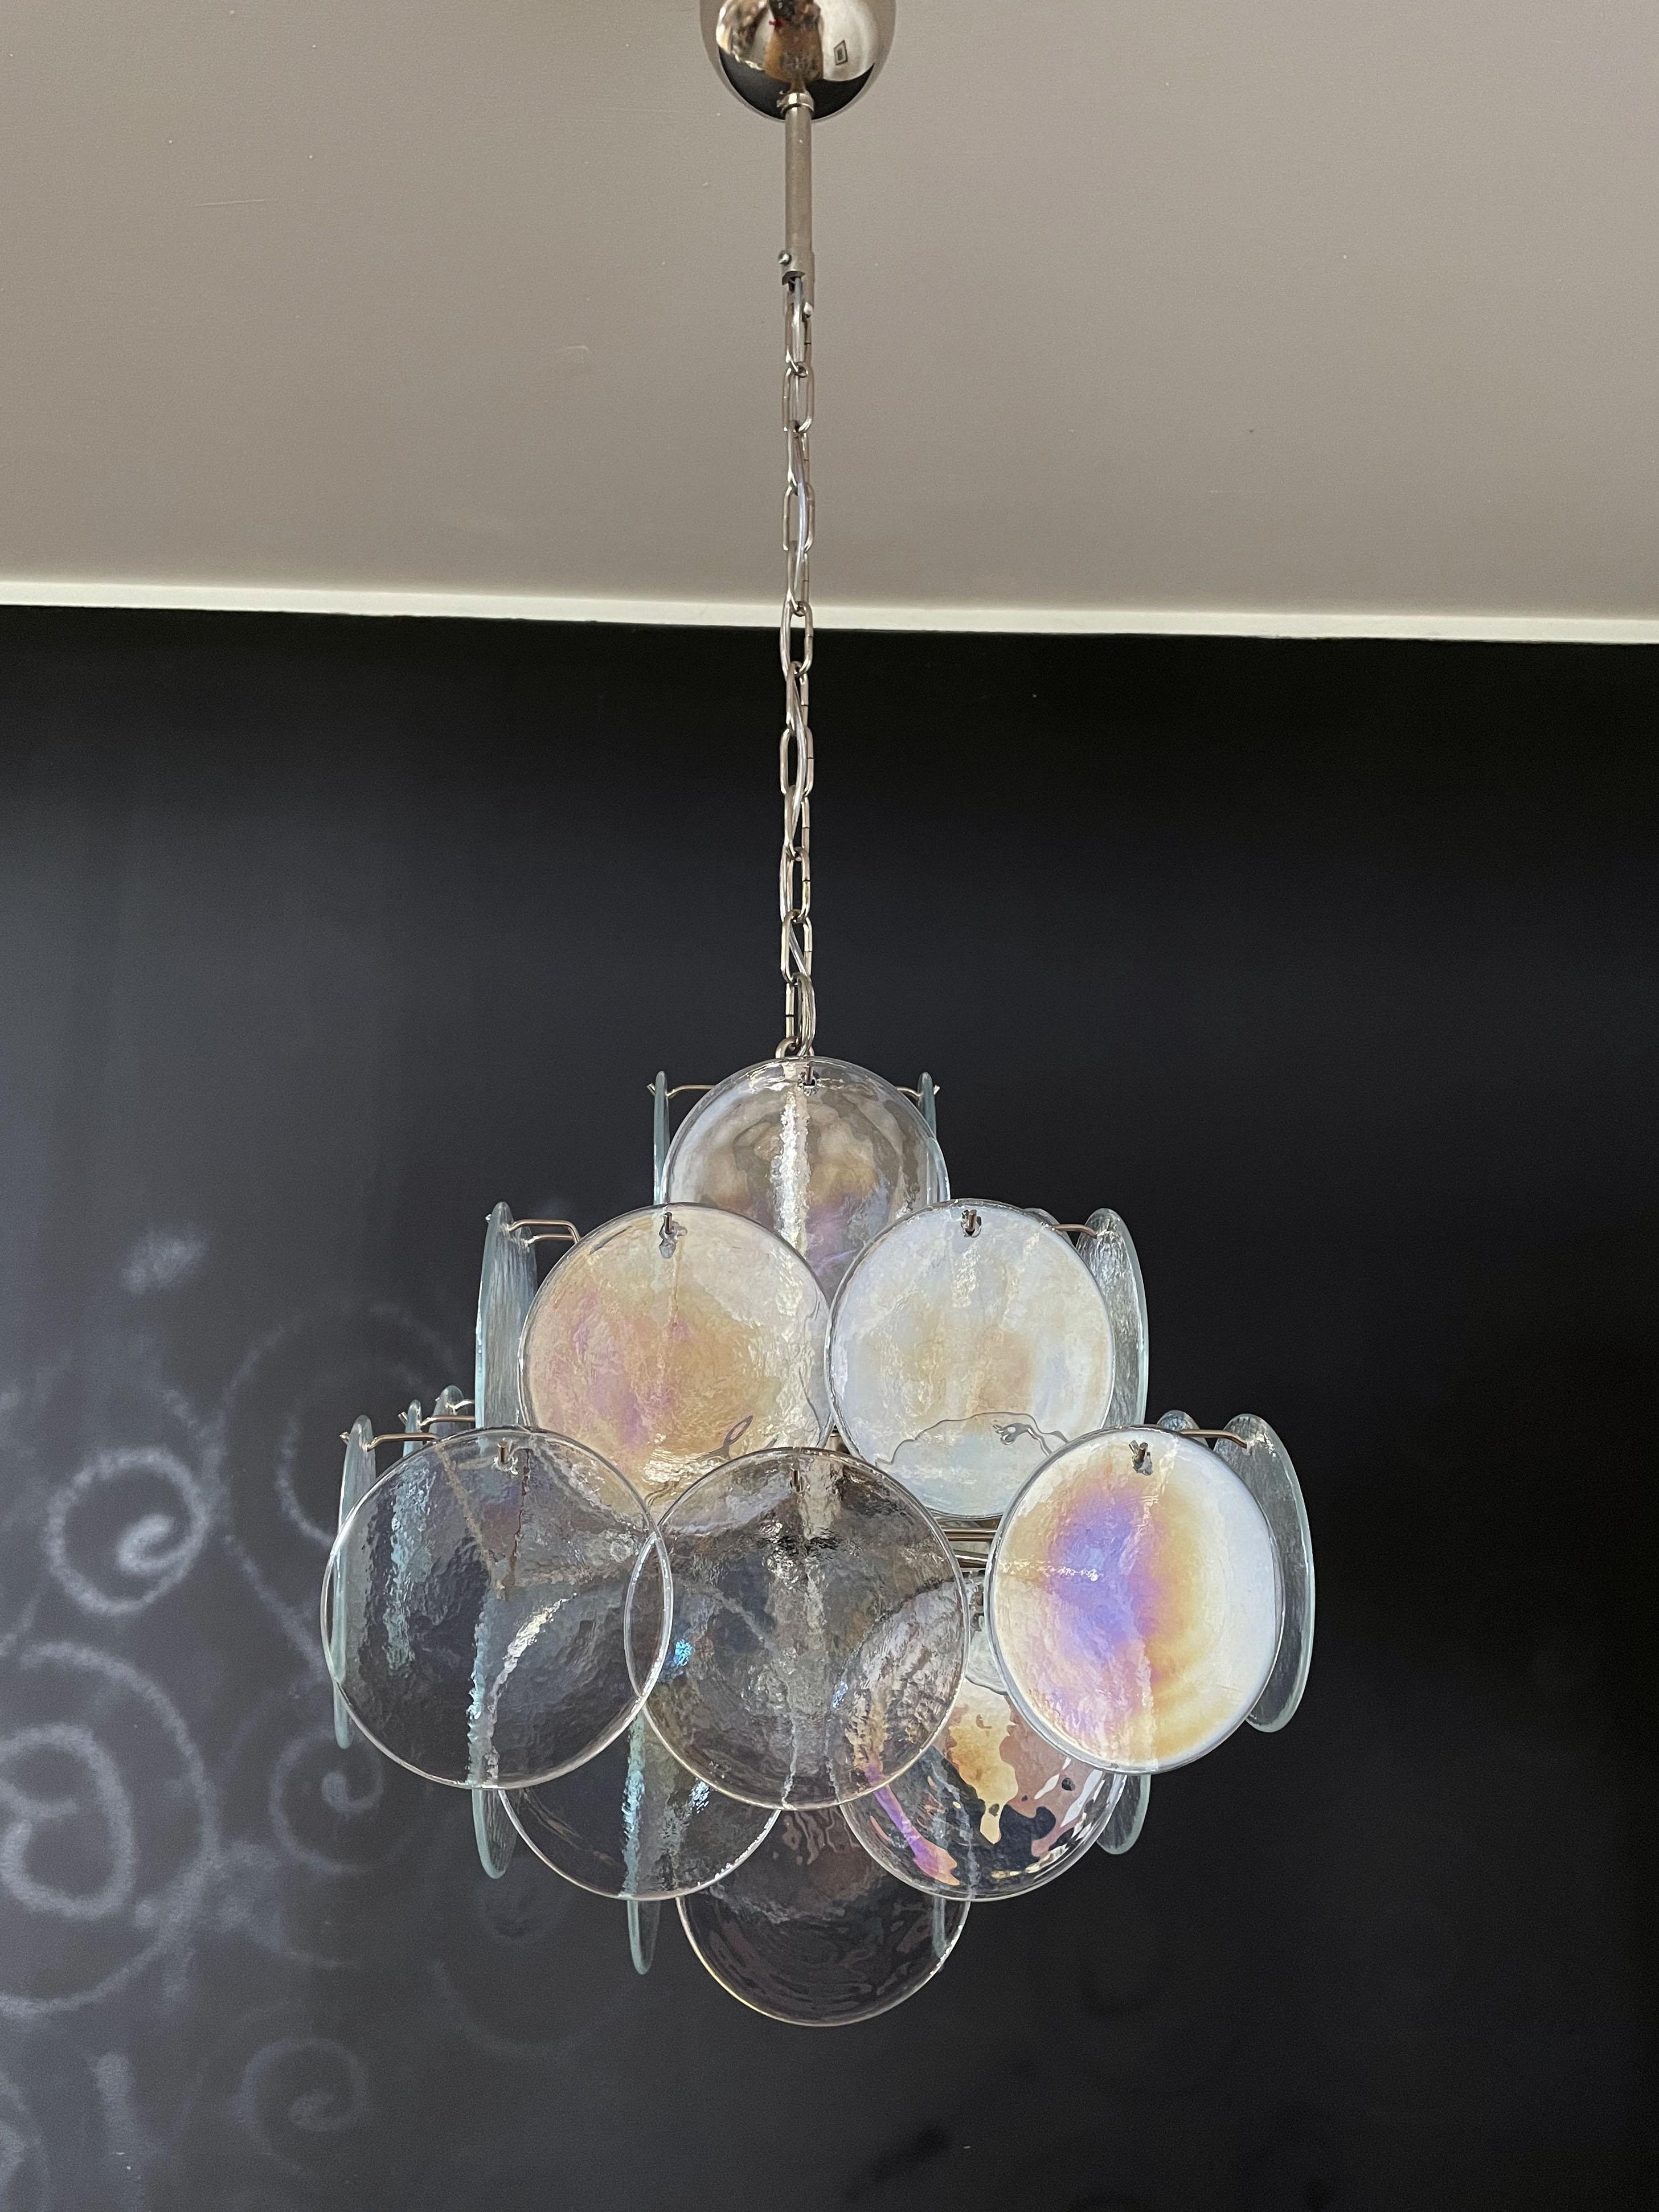 Vintage Italian Murano chandelier in Vistosi style. The chandelier has 36 fantastic iridescent discs in a nickel metal frame. The glasses have the particularity of reflecting a multiplicity of colors, which makes the chandelier a true work of